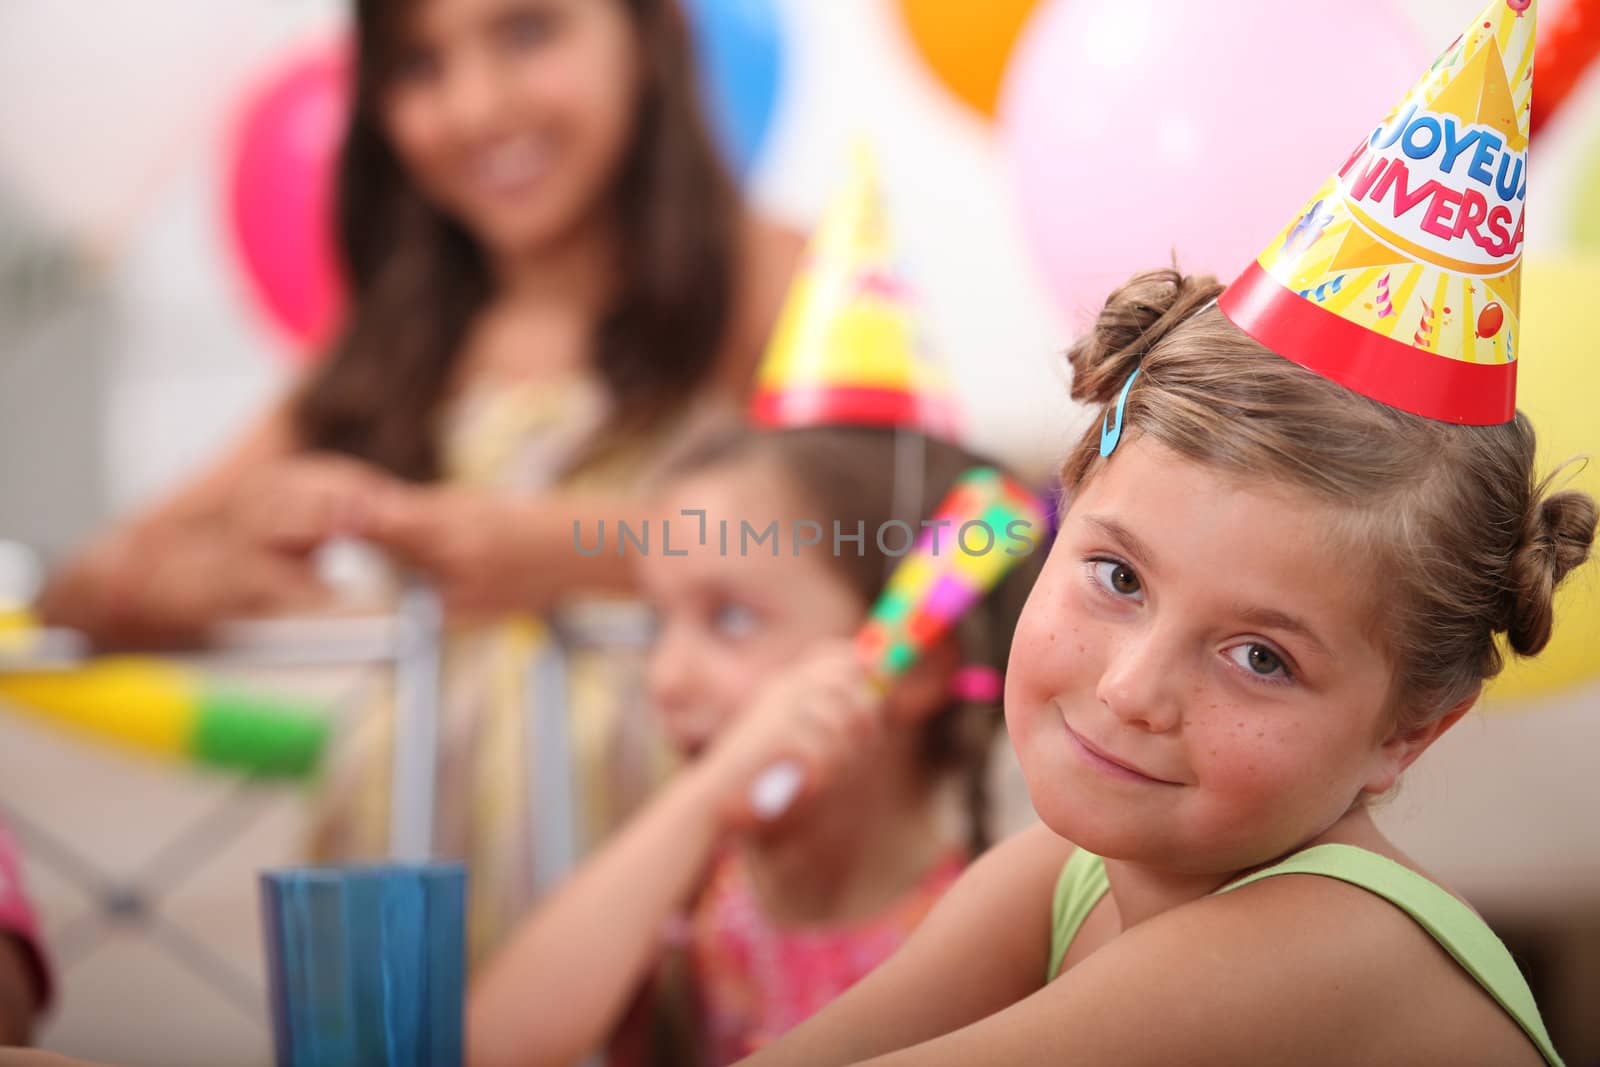 Little girl at birthday by phovoir